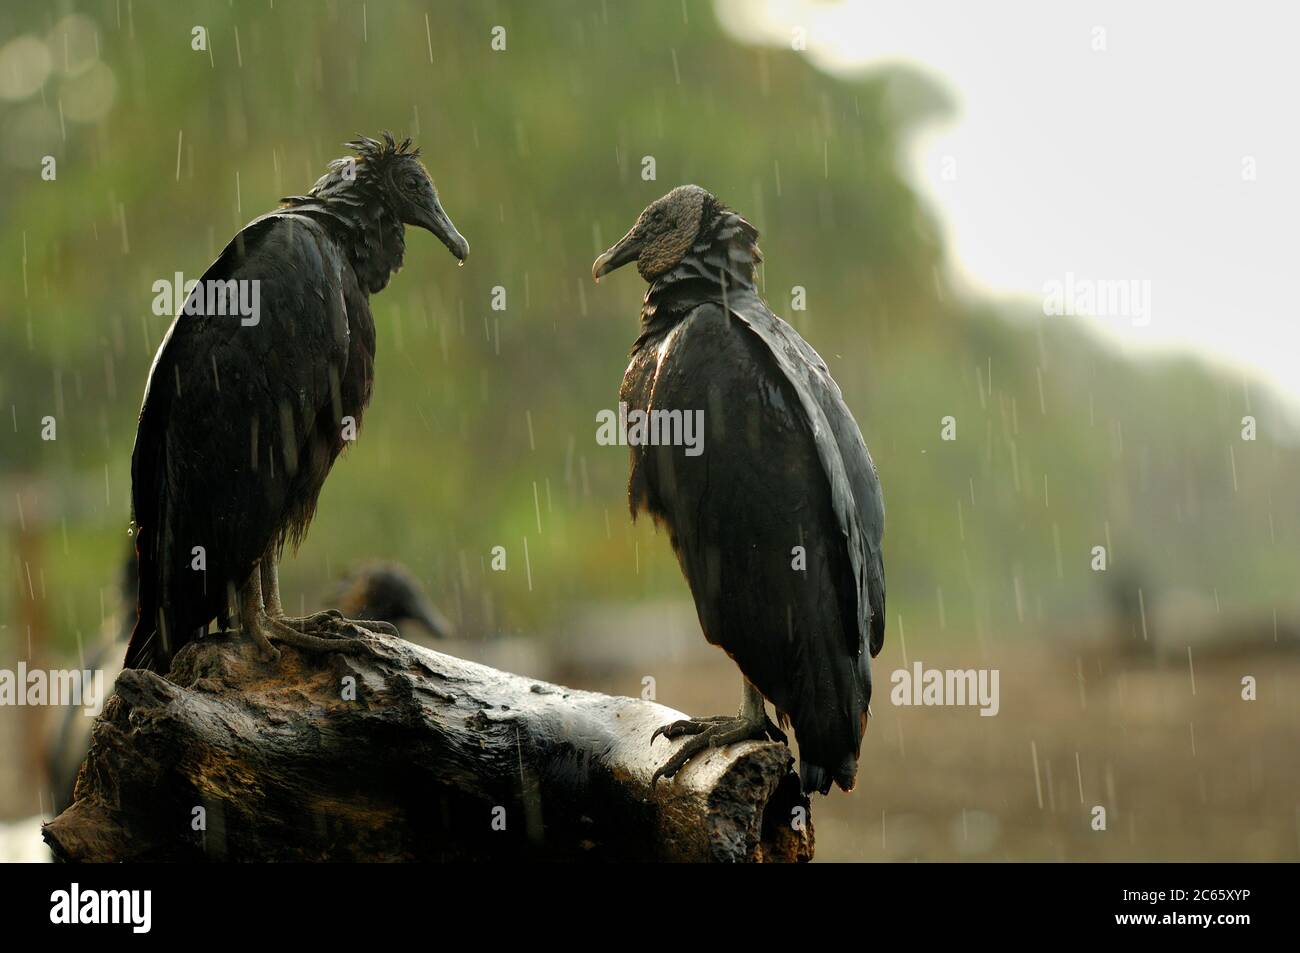 Black vultures (Coragyps atratus) in the rain at Playa Ostional, Costa Rica, Pacific coast, waiting fo a chance to forage on eggs or hatchlings of the olive ridley sea turtle (Lepicochelys olivacea). Stock Photo